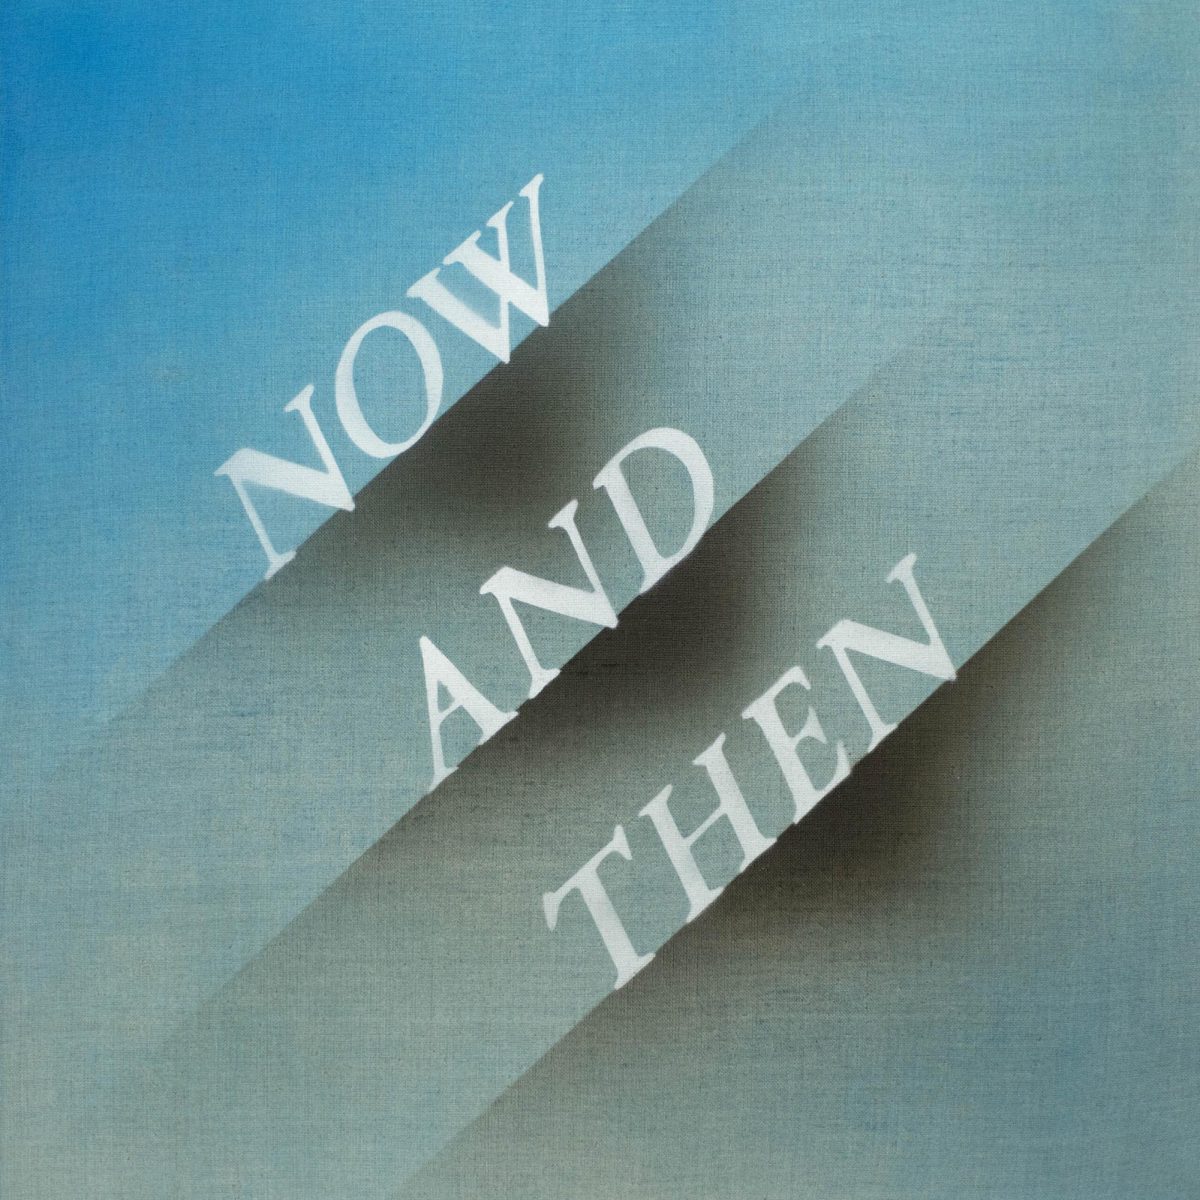 Now+And+Then+was+part+of+a+three-song+cassette+tape+that+Yoko+Ono+gave+Paul+McCartney+after+John+Lennons+death.+%28Photo+courtesy+of+Stereogum%29